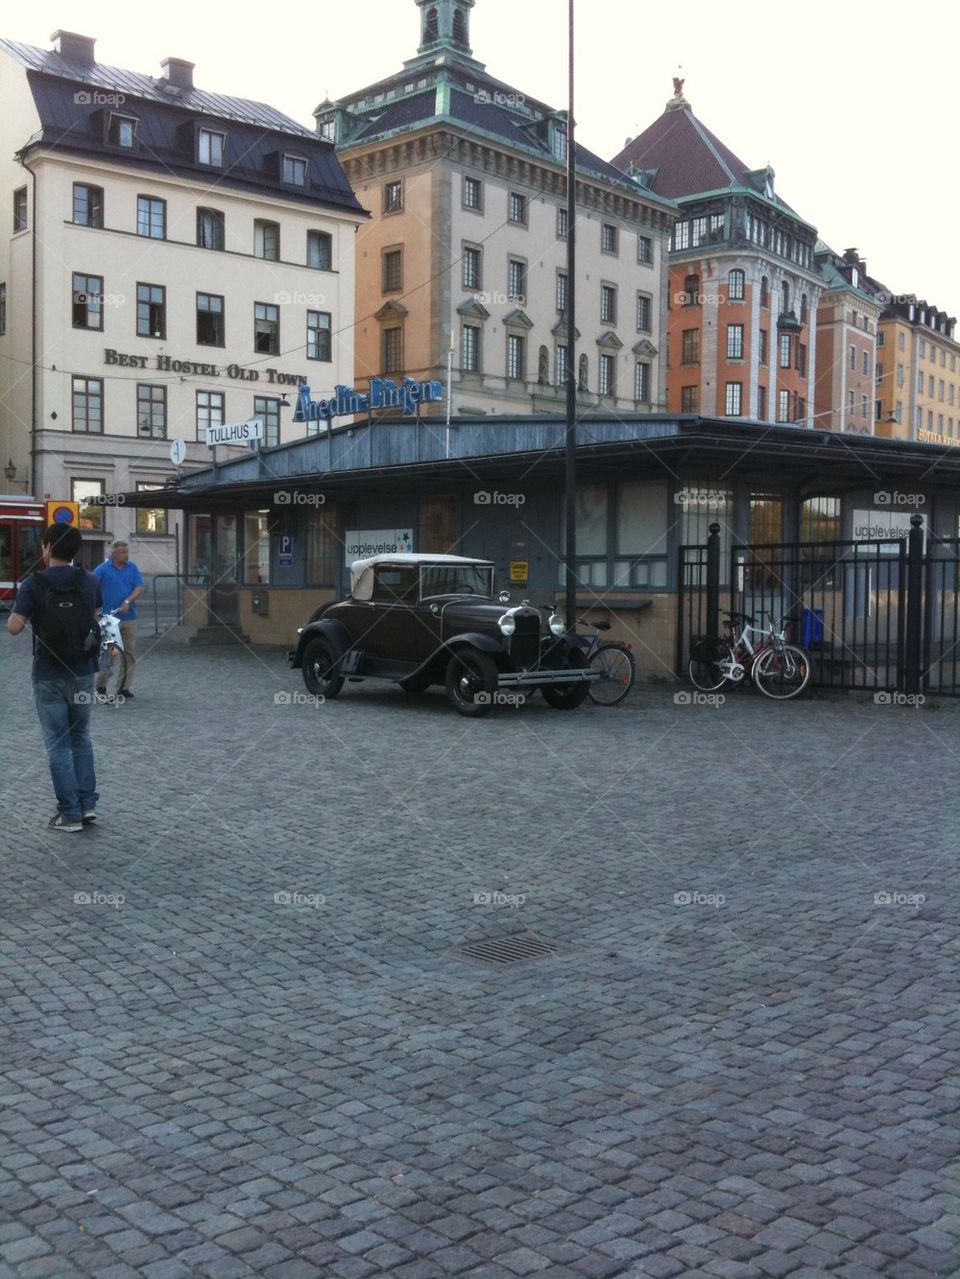 The old car in old town